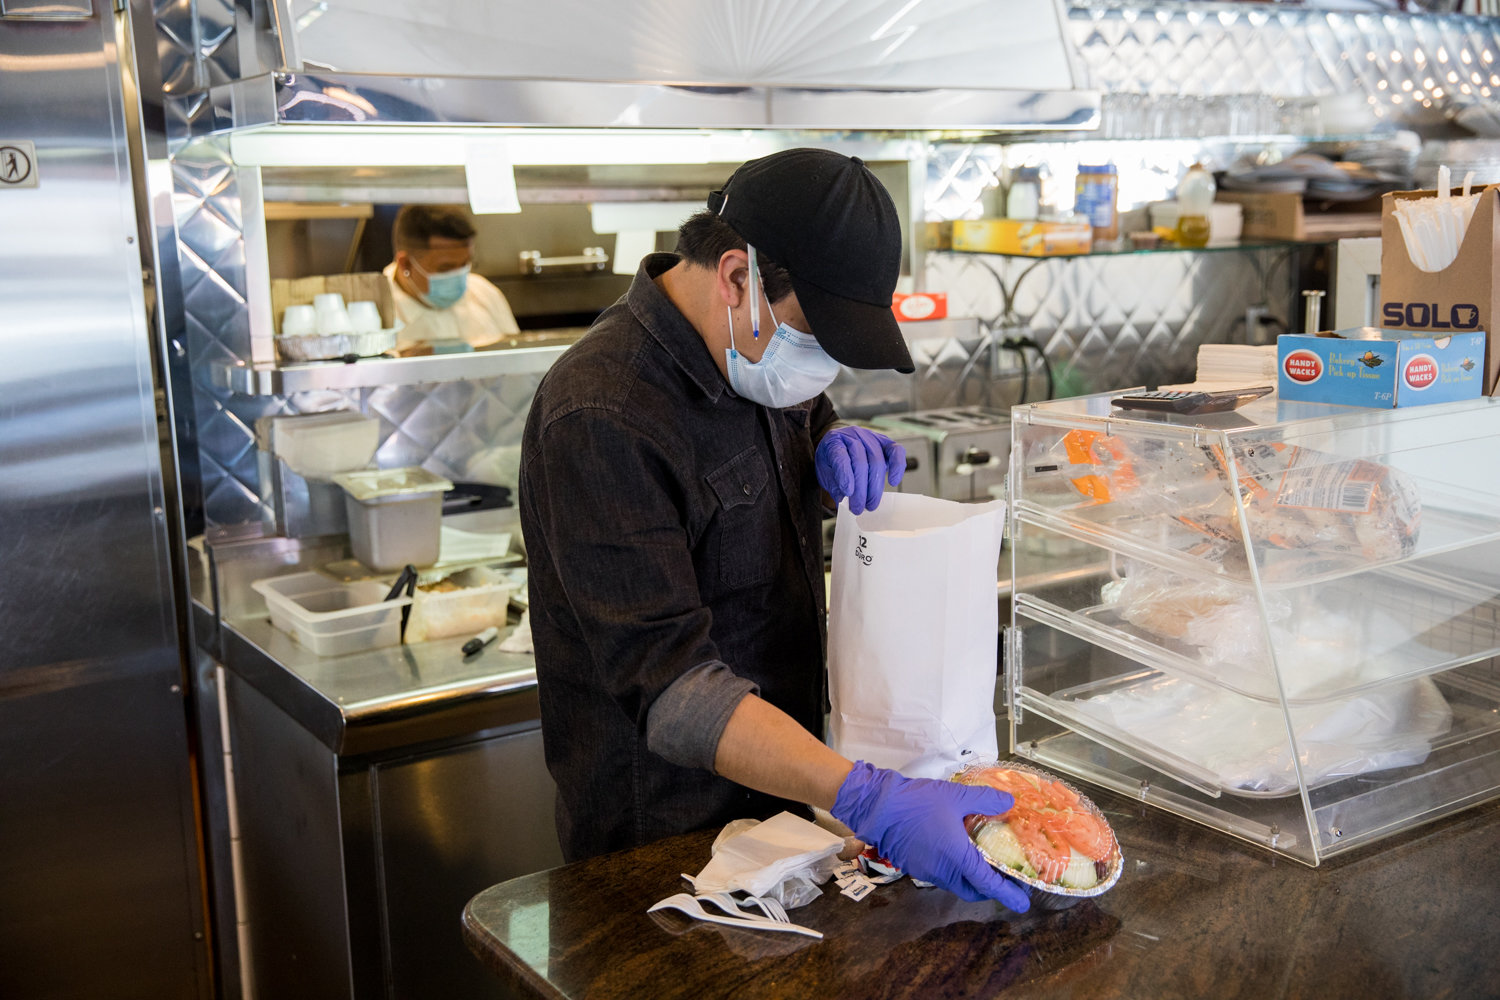 A worker bags an order at Tibbett Diner, which, like many small businesses, has suffered as a consequence of the coronavirus pandemic.